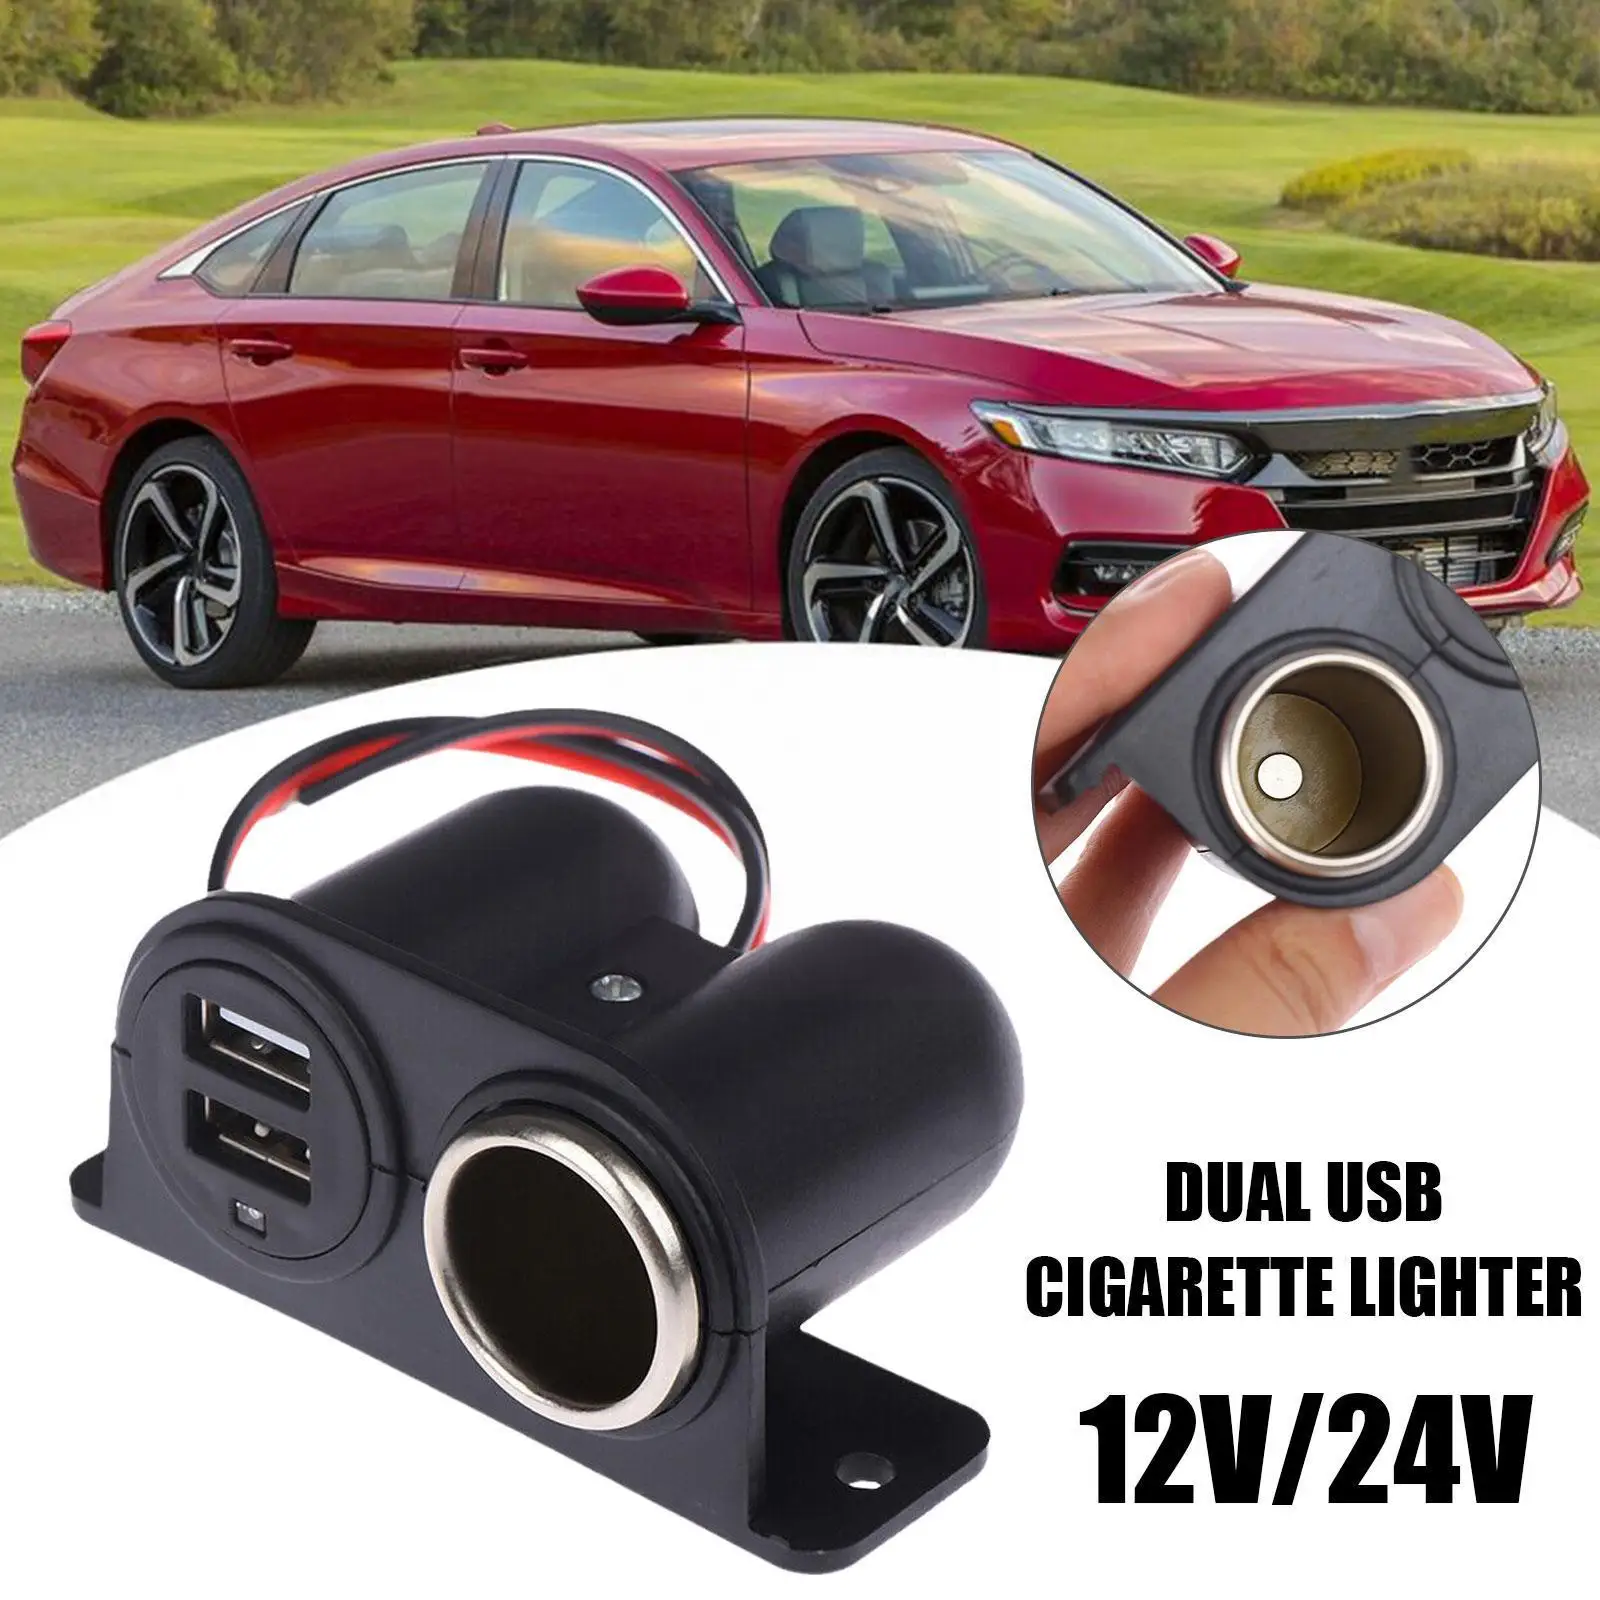 

Car Charger 12V/24V Car Cigarette Lighter Socket Splitter Power Chargers Port Adapter Two Charger 3.1A Car 3100mA USB W6C8